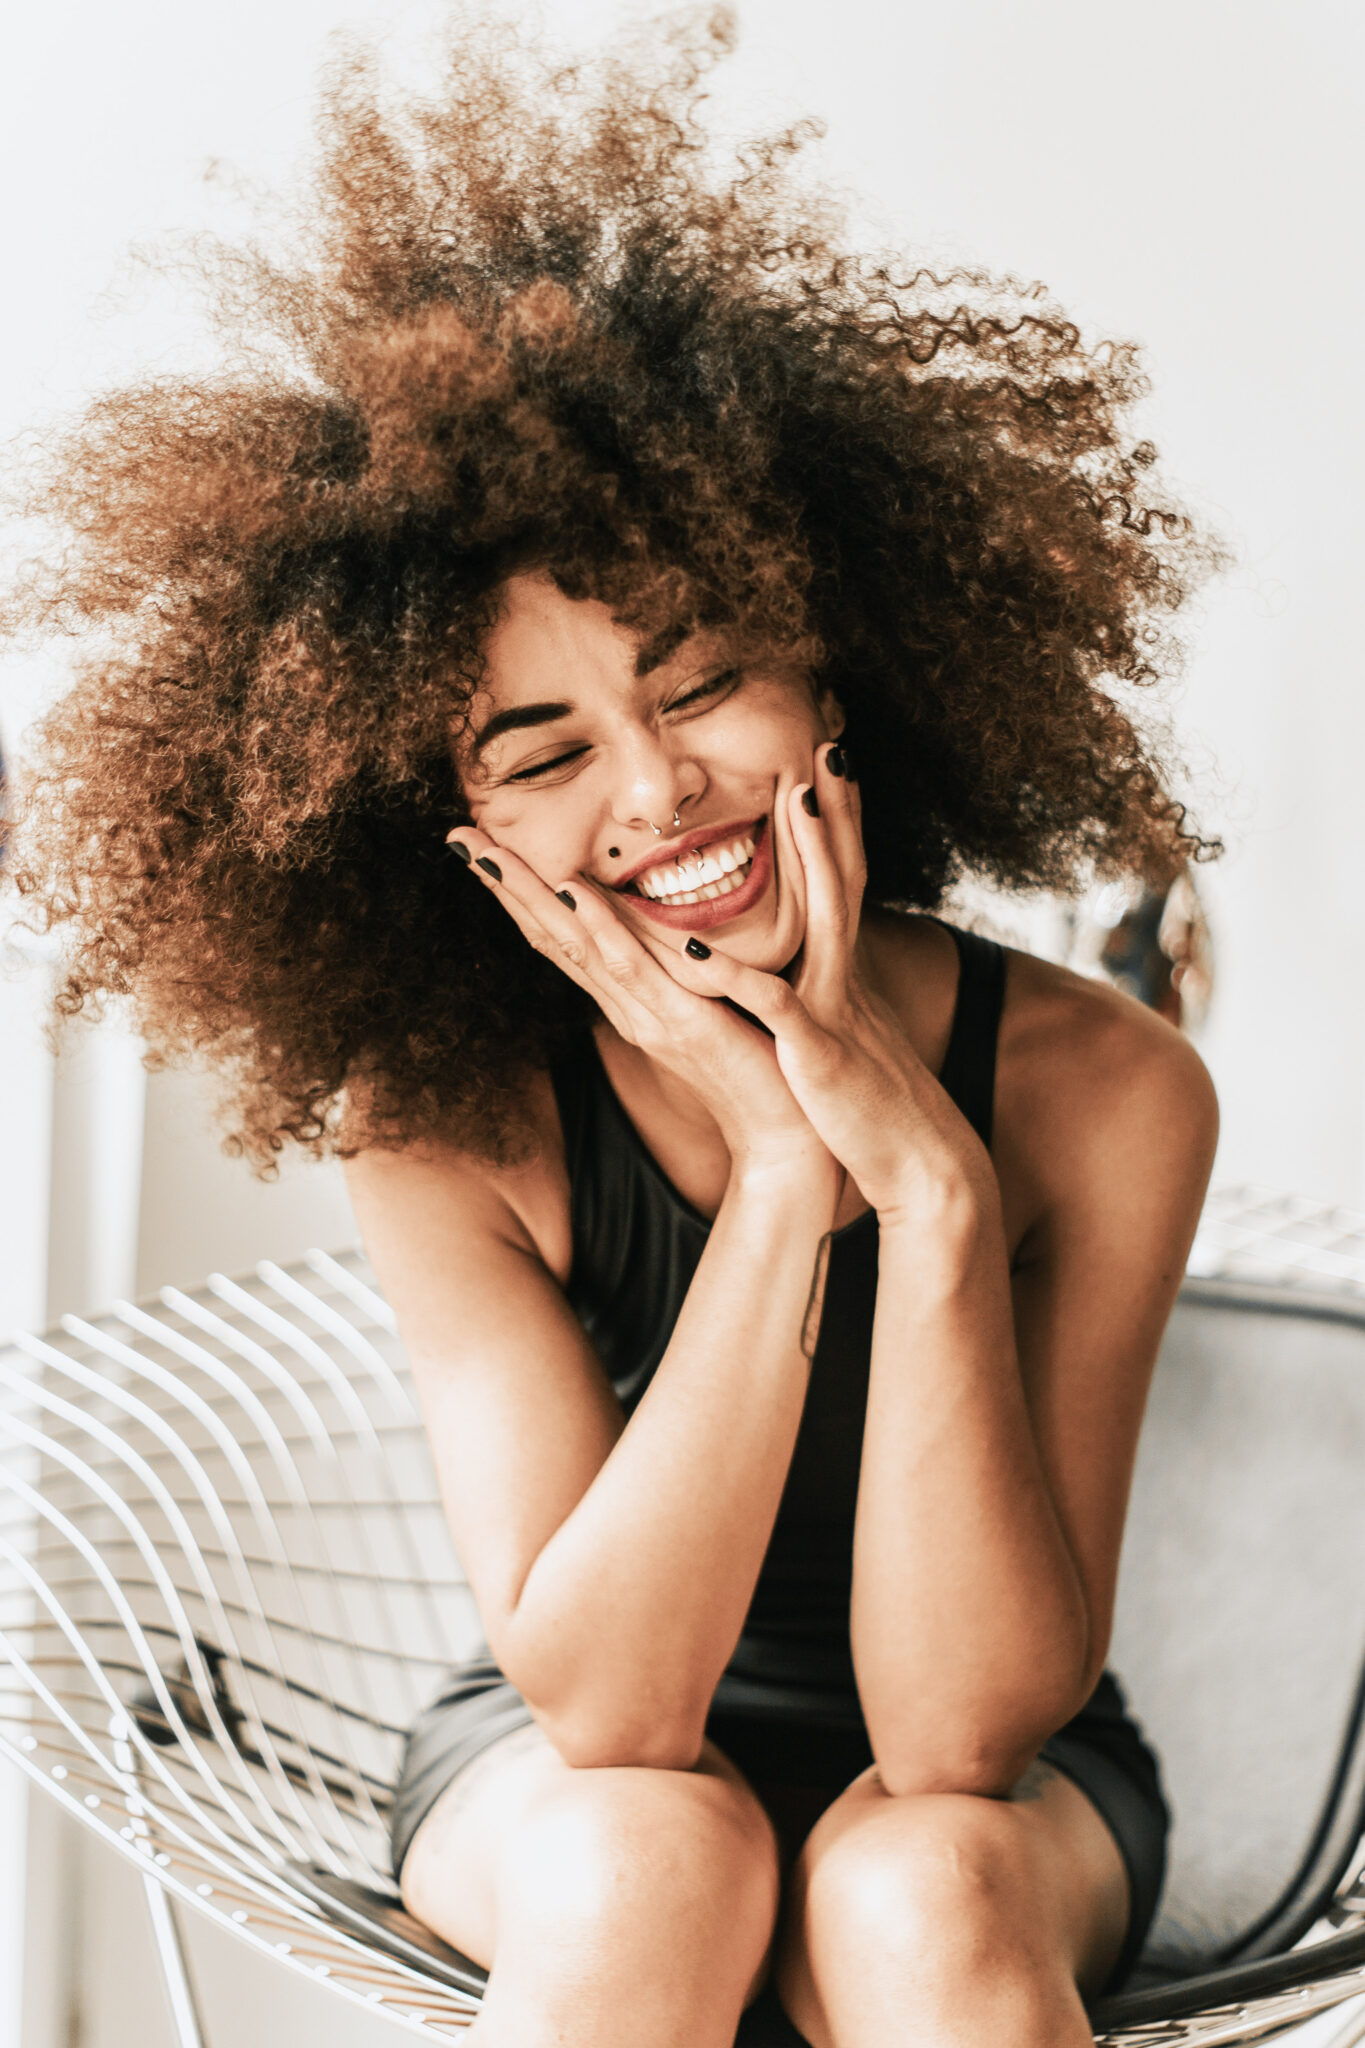 Woman holds her face and smiles, she looks confident, and carefree. This article covers the best tips for living life with more confidence.